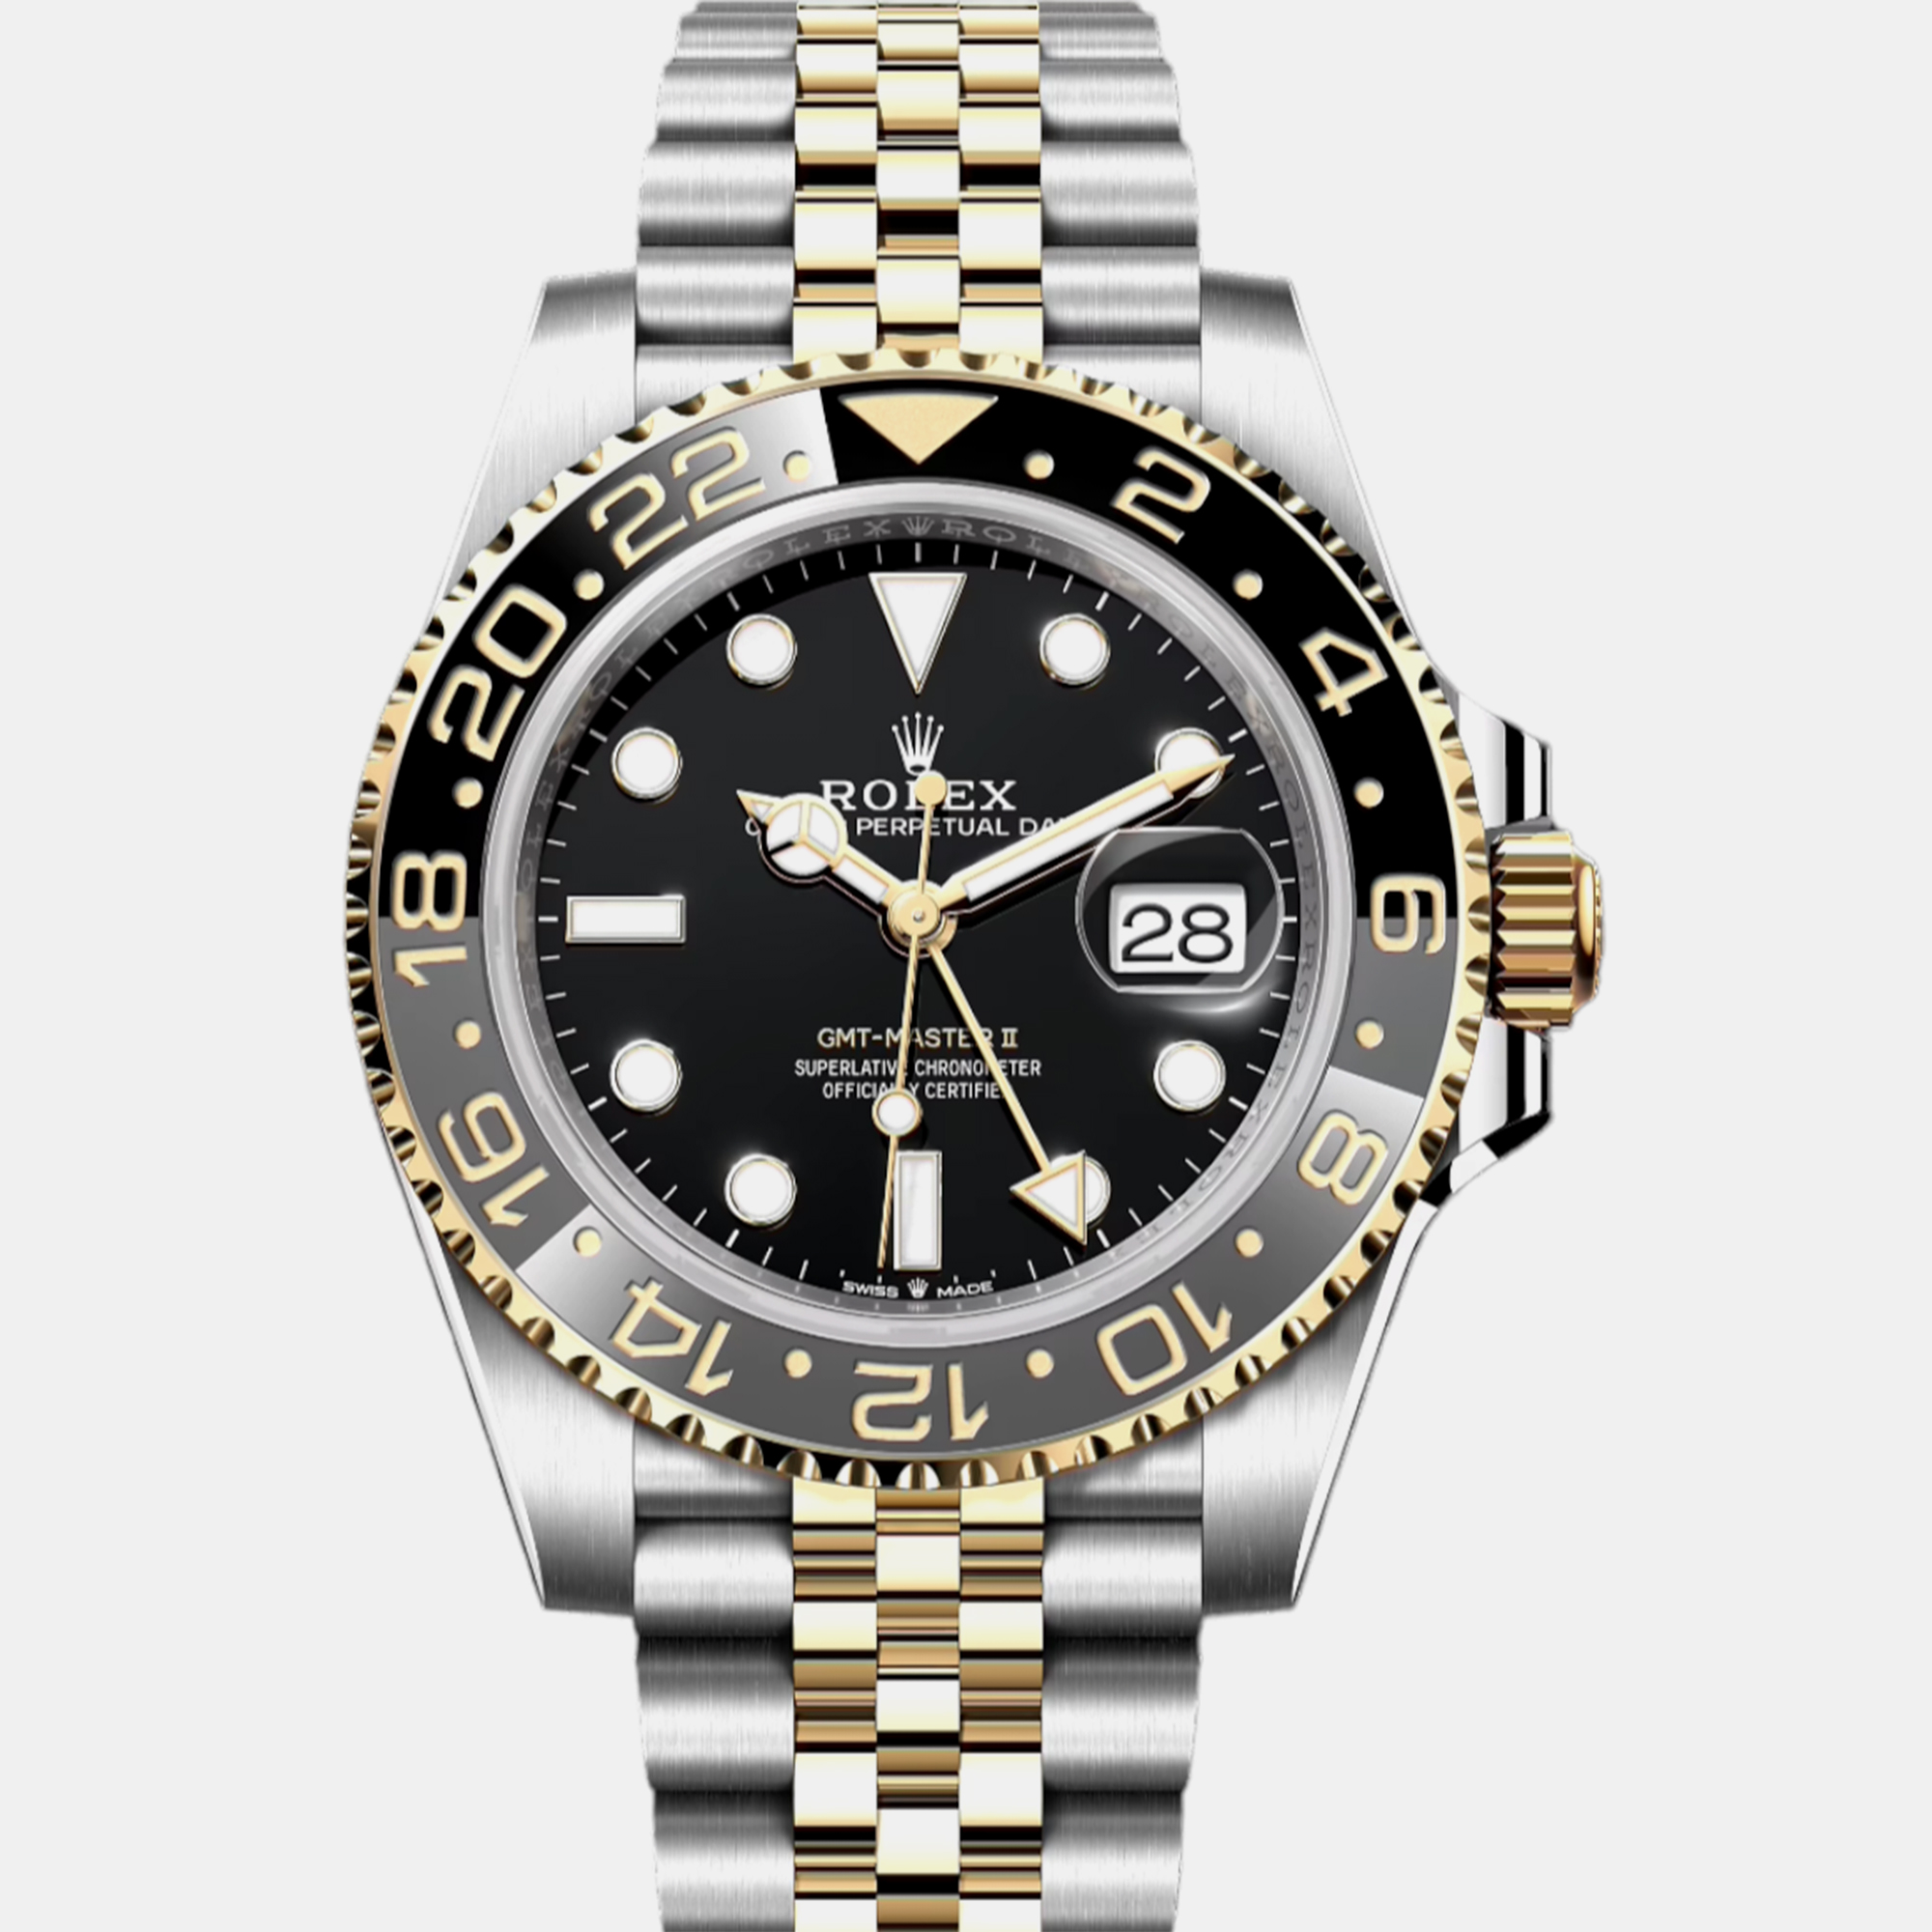 Rolex -18k yellow gold & stainless steel 40 black automatic gmt-master ii 126720 grnr